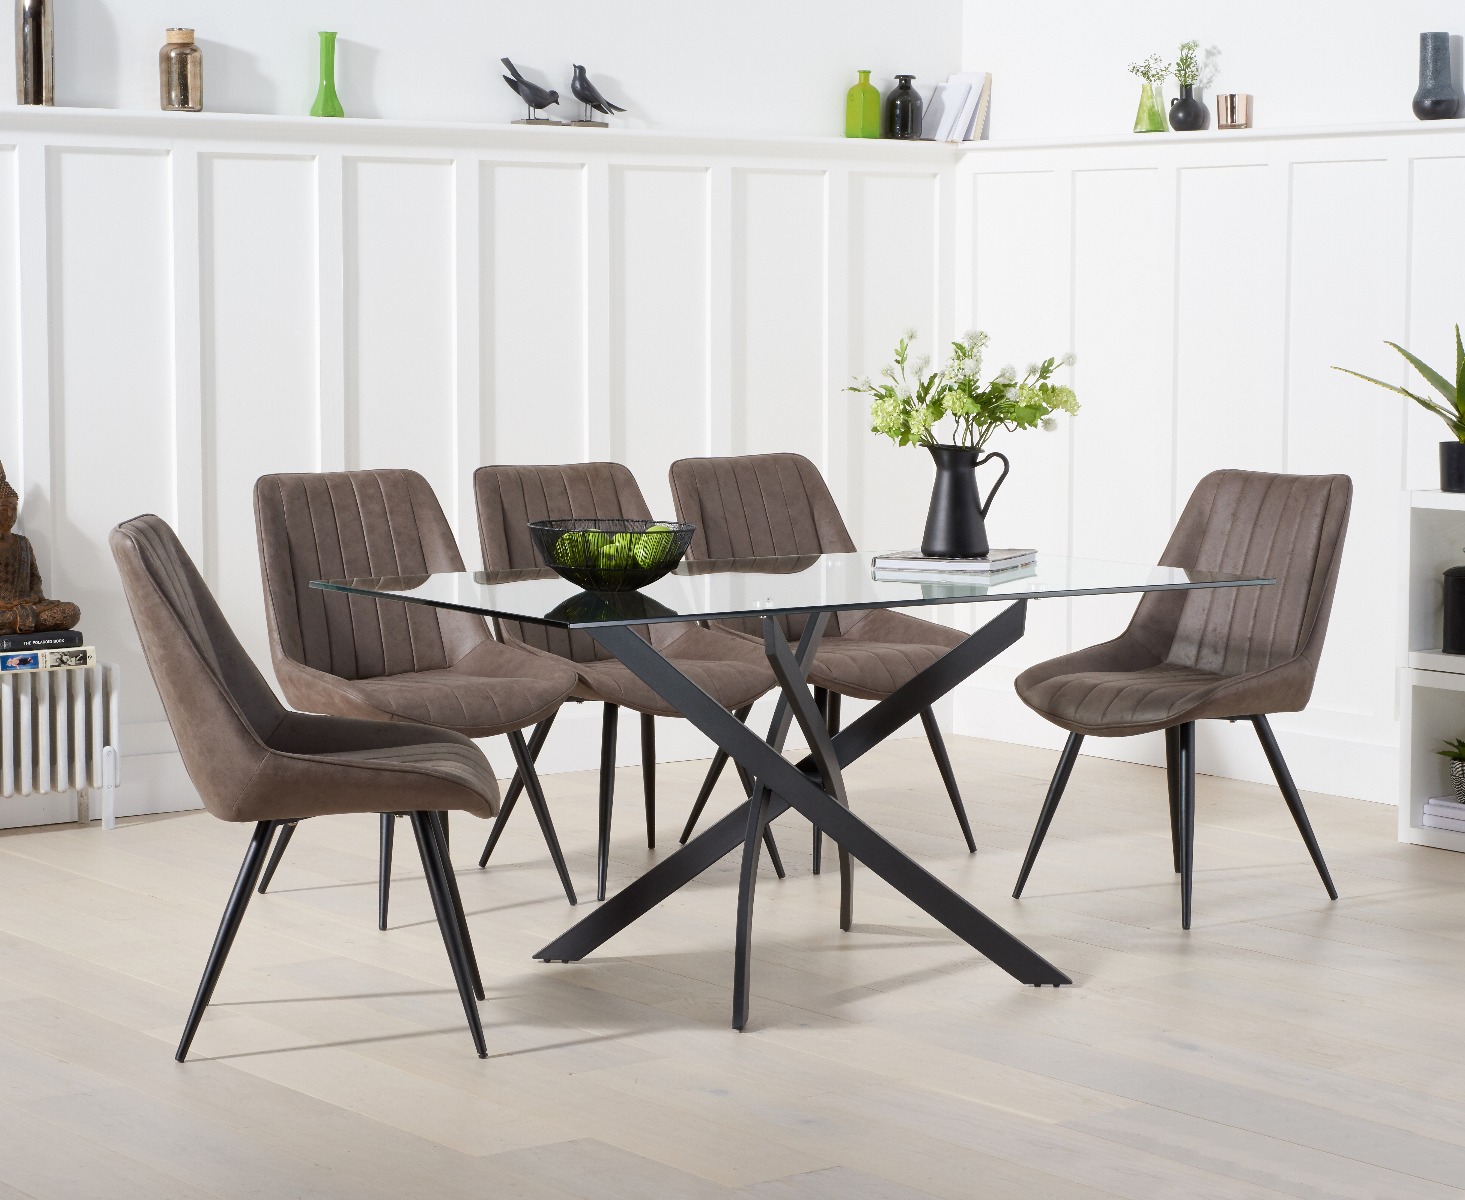 Mara 160cm Glass Dining Table With 6 Brown Brody Antique Chairs